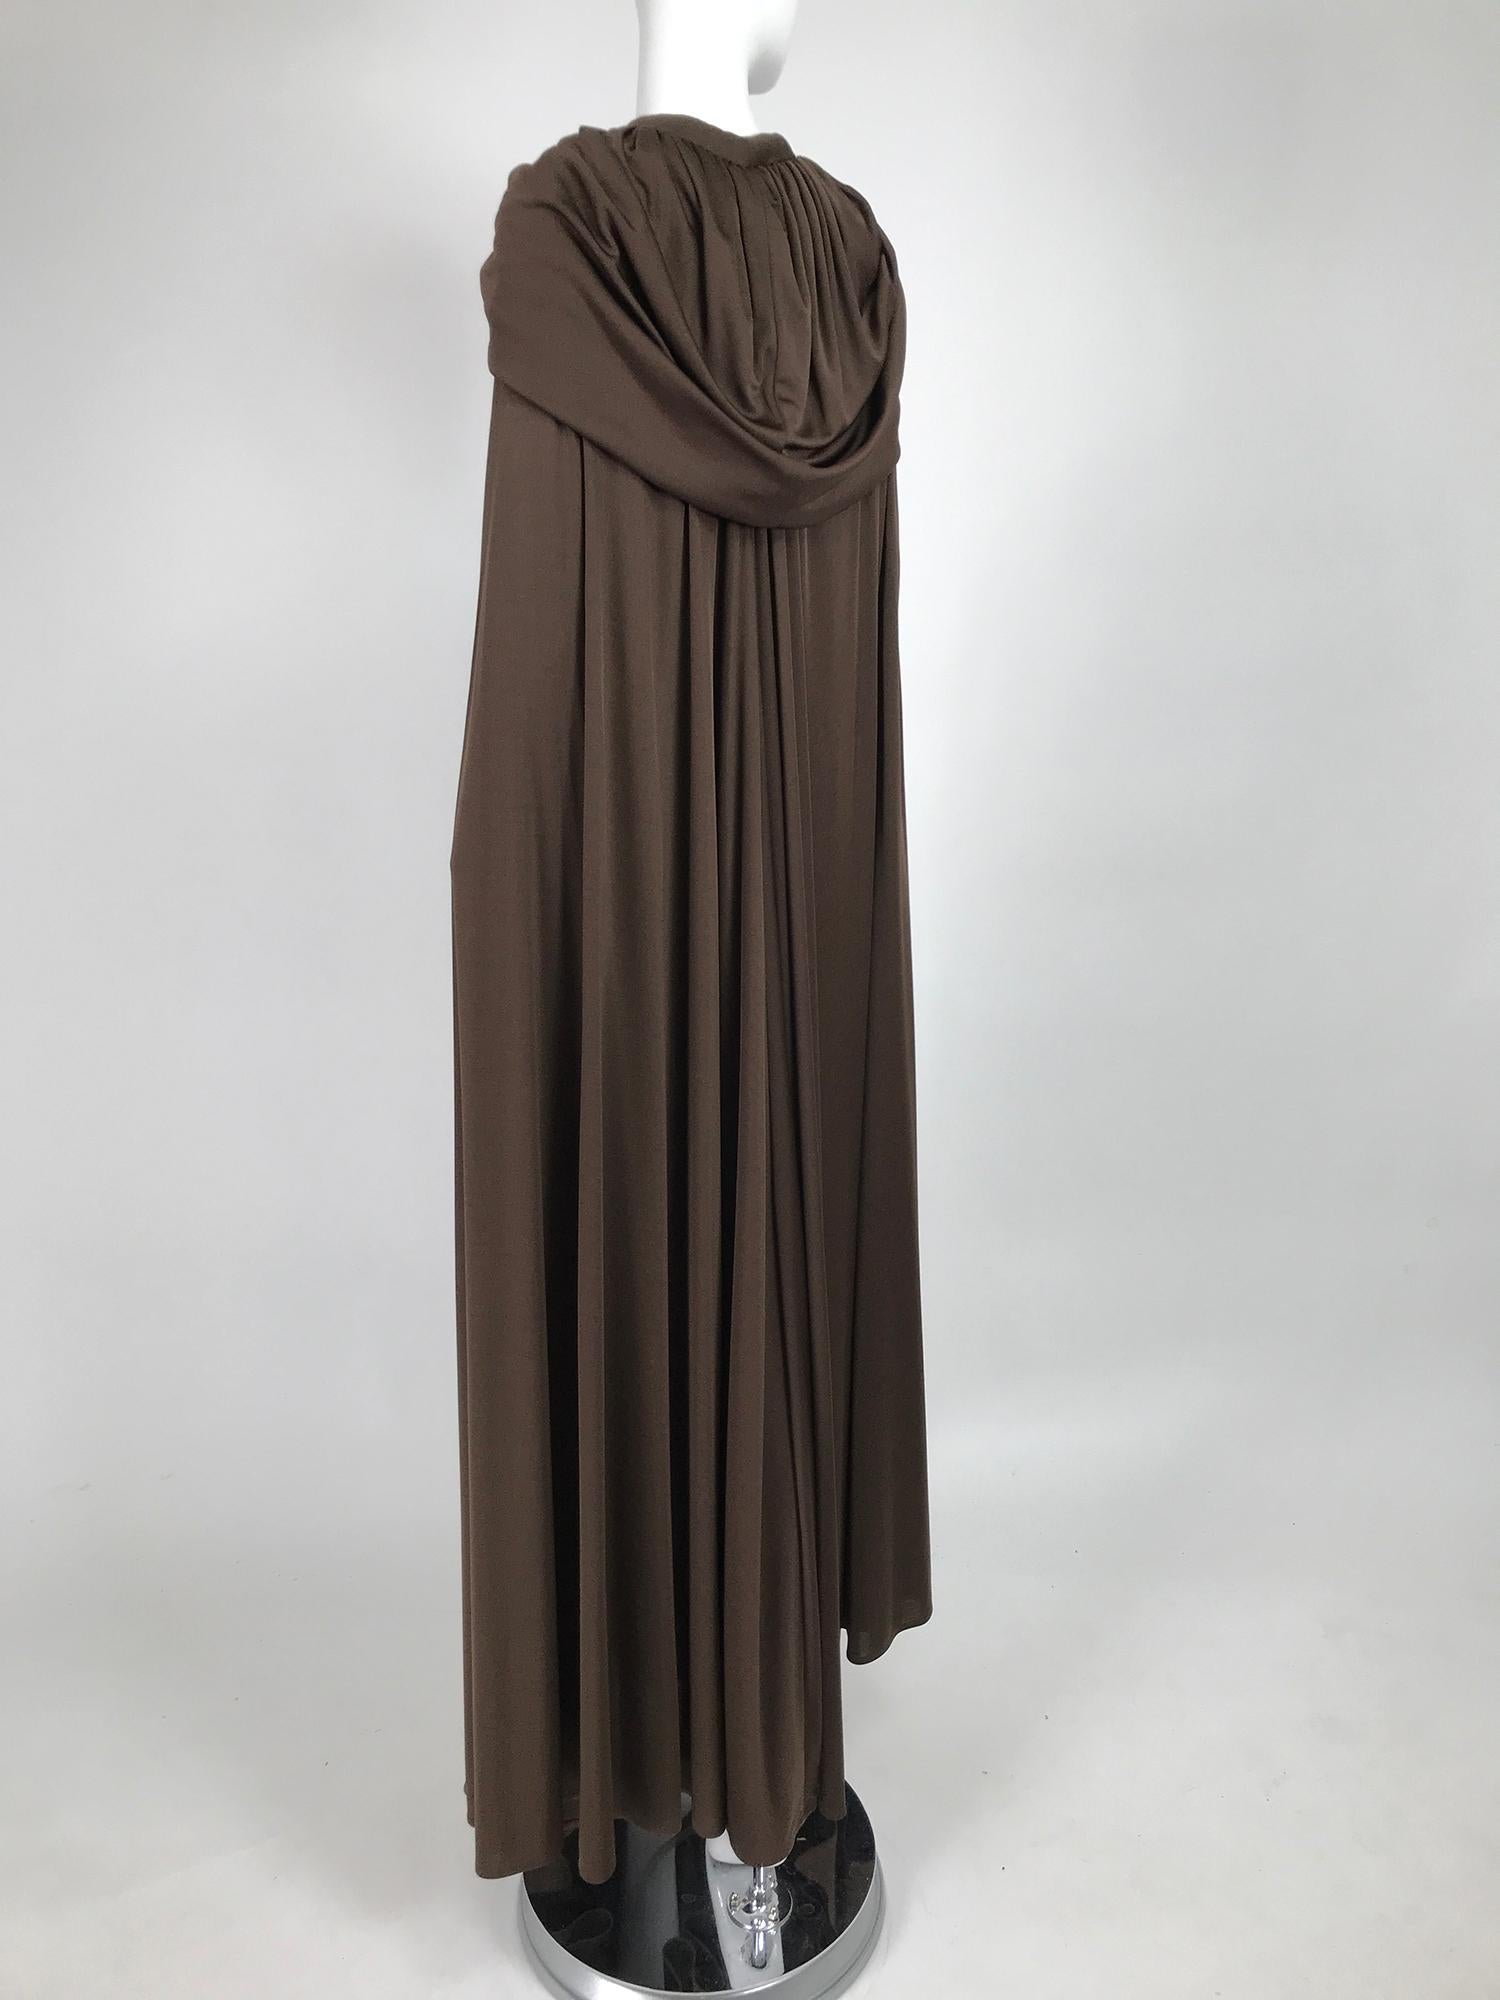 Black Loris Azzaro Couture Chocolate Brown Silky Jersey Full Length Hooded Cape 1970s For Sale